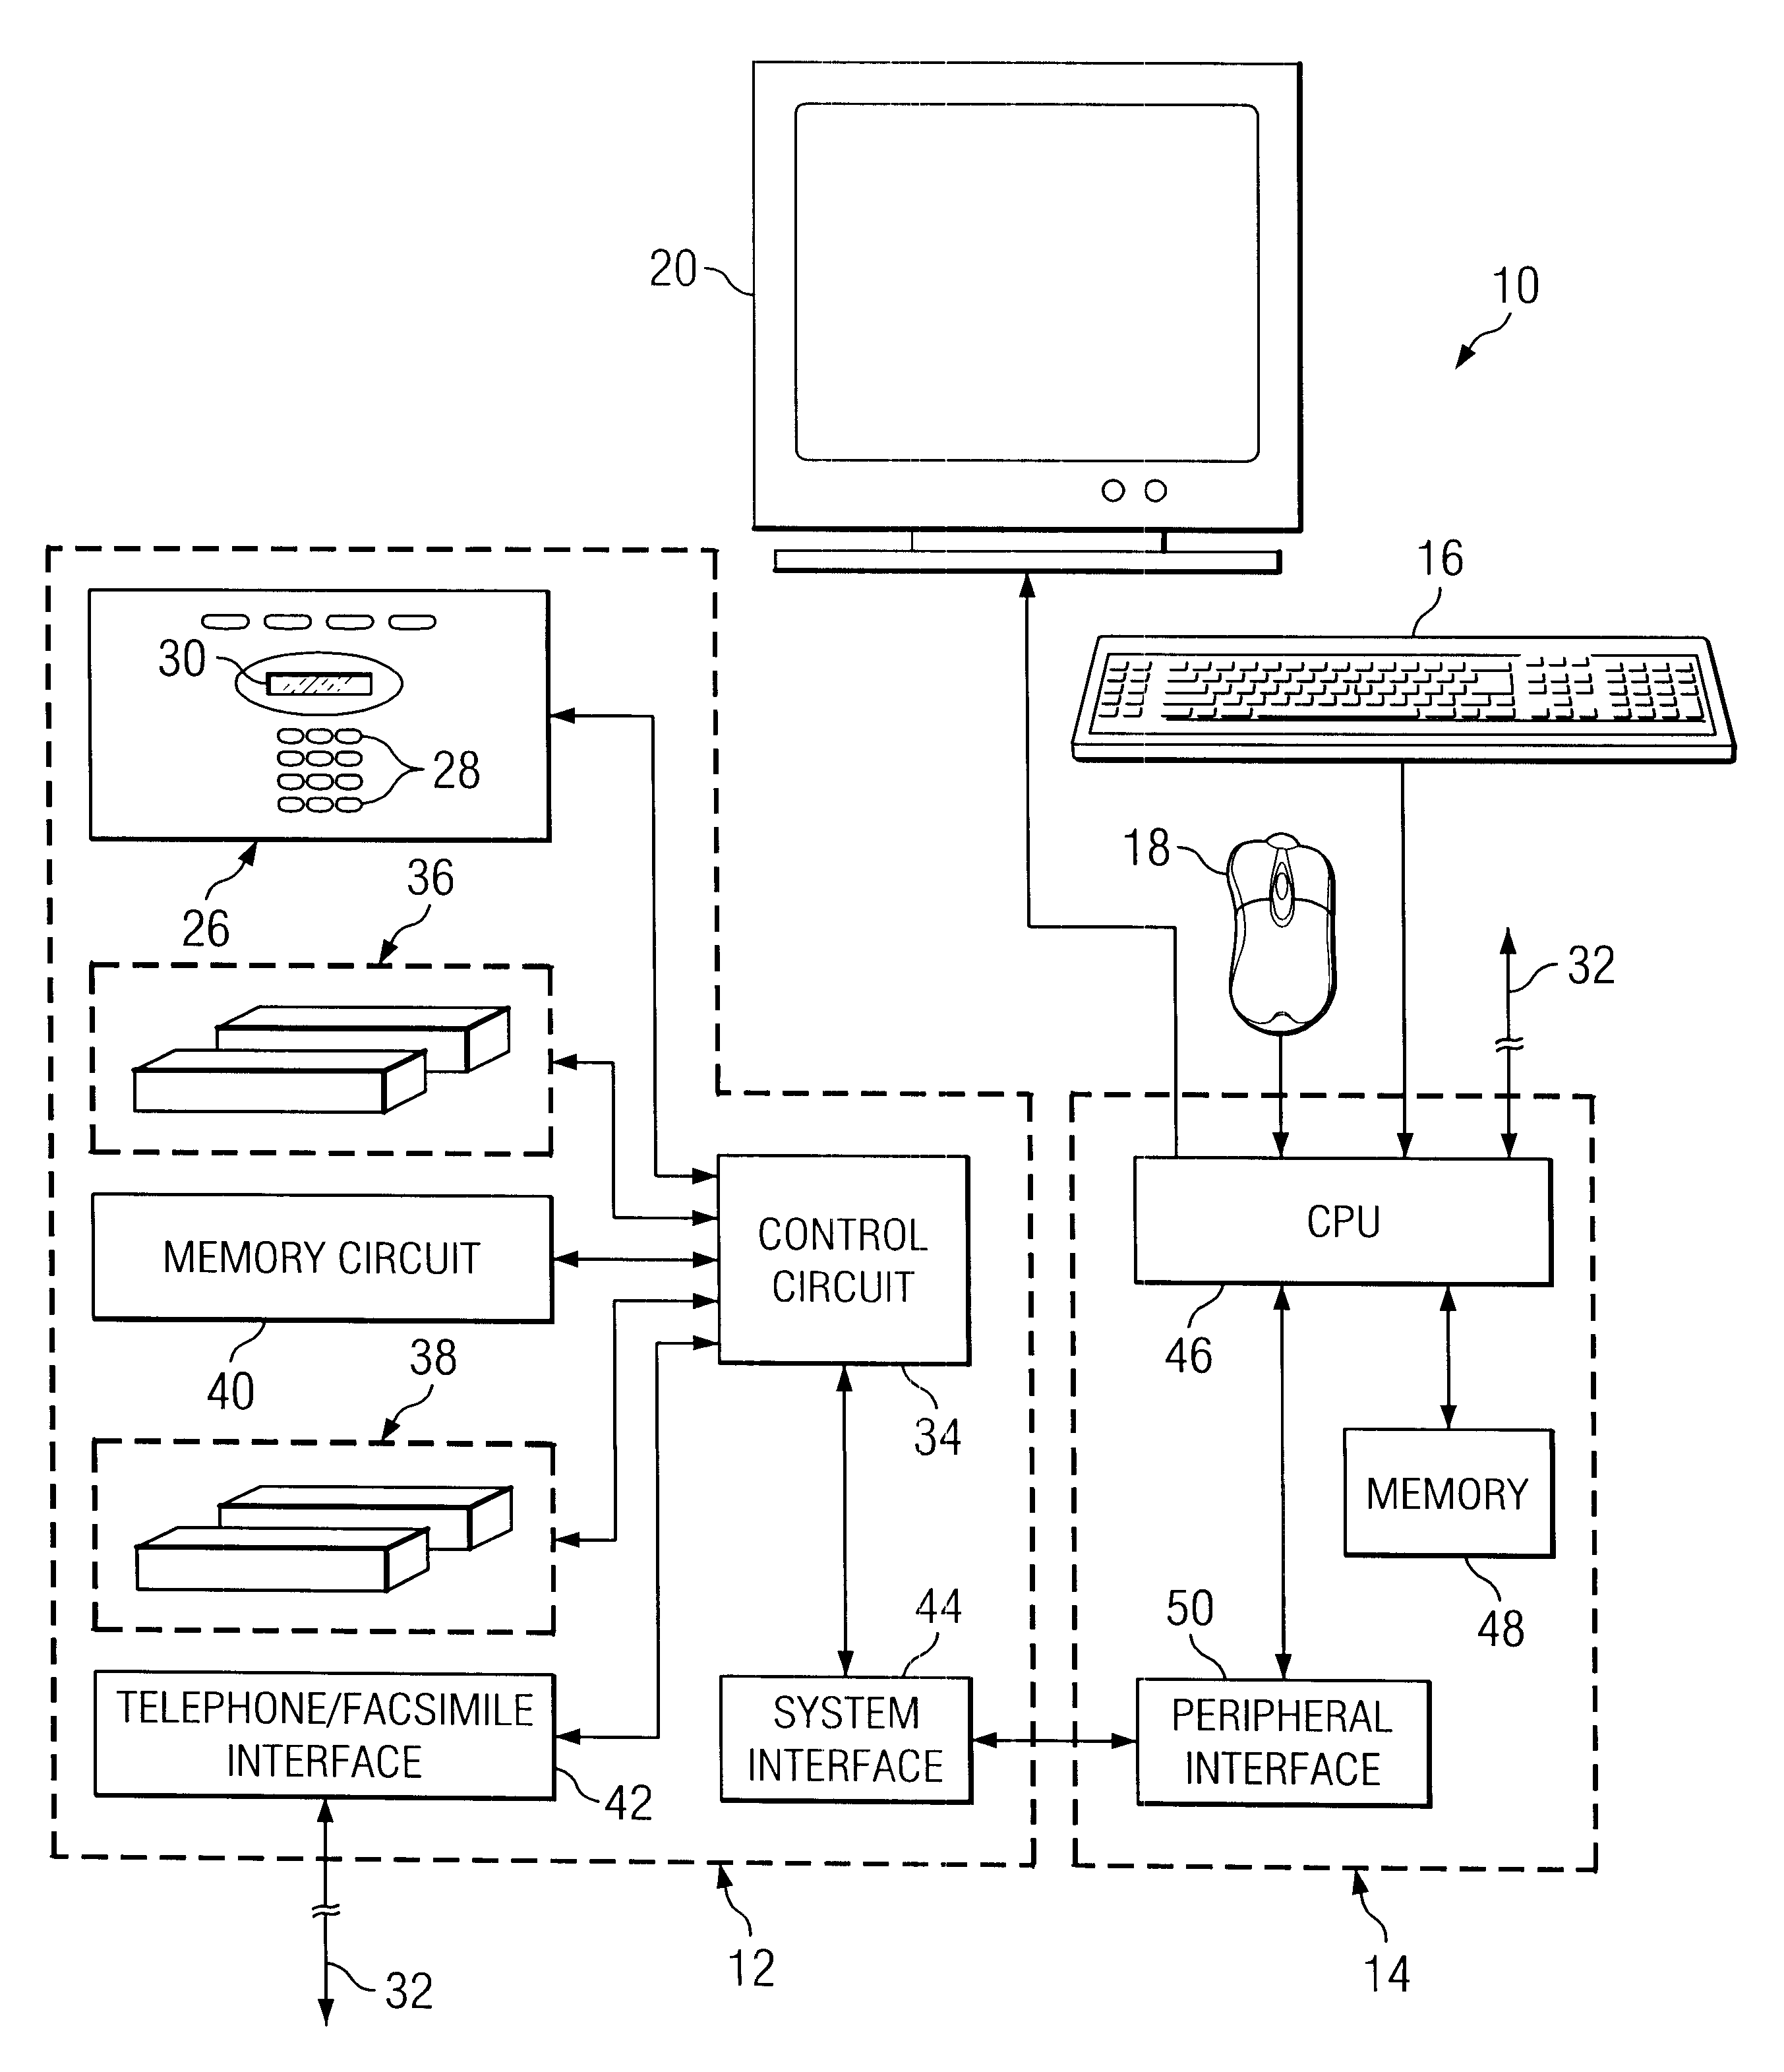 Method and apparatus for controlling a scanning device